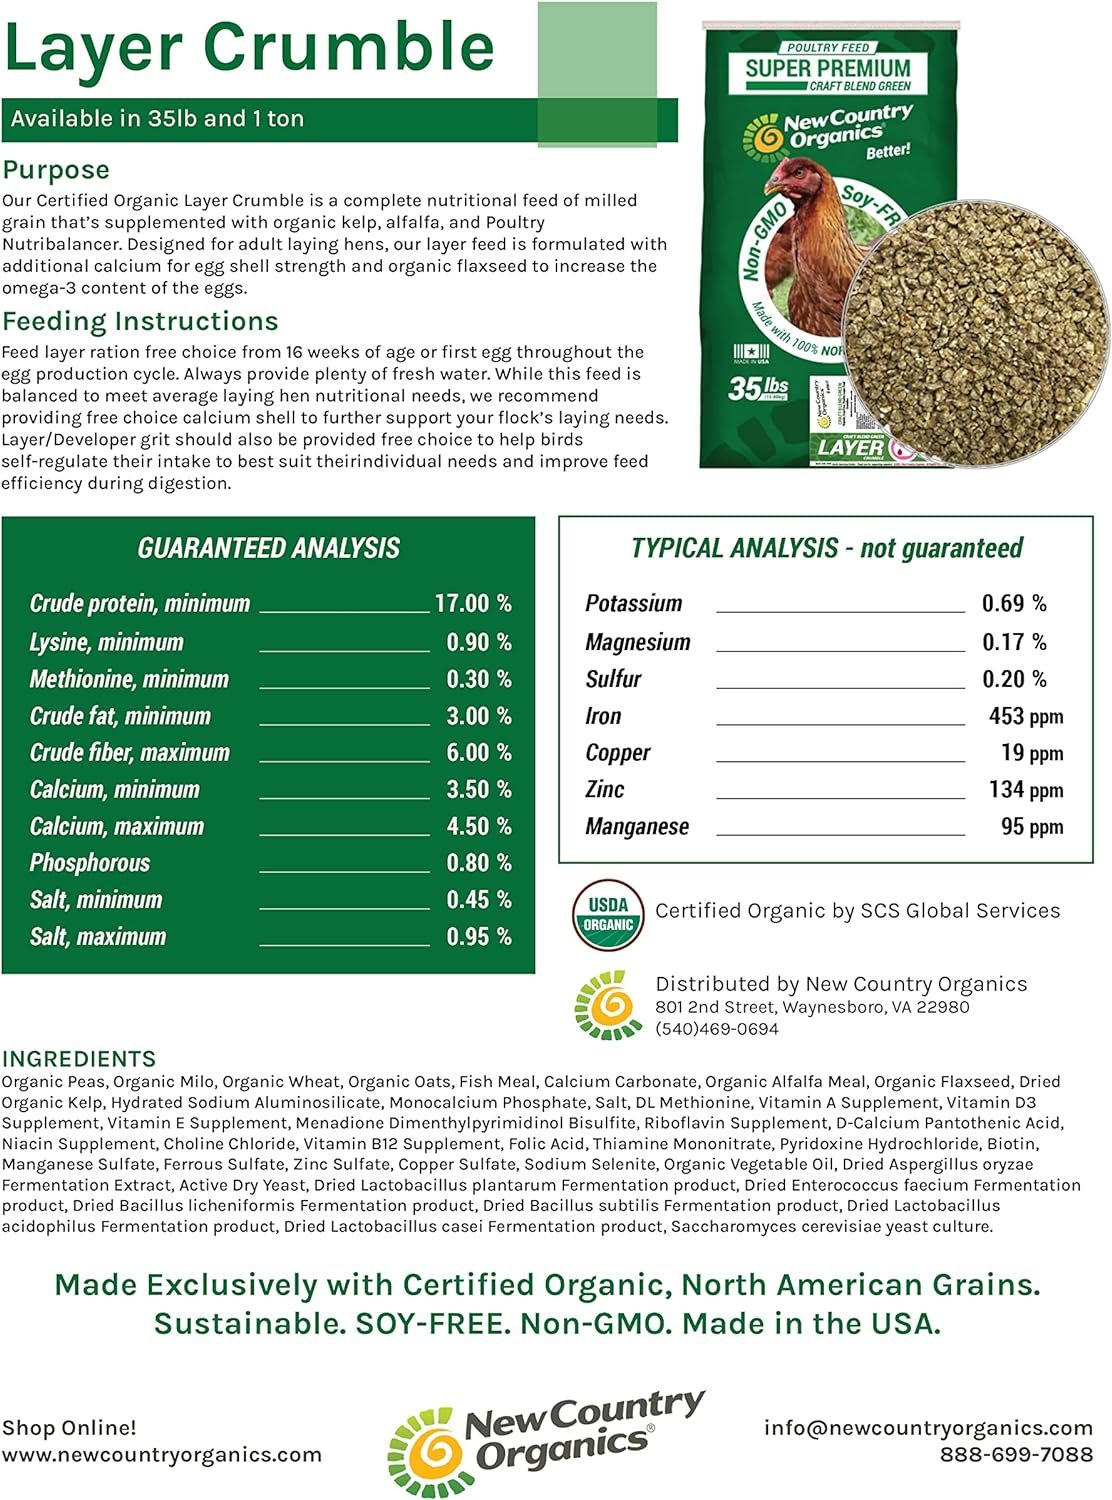 New Country Organics | Layer Crumble for Laying Hens | Soy-Free | 17% Protein | Certified Organic and Non-GMO | 35 lbs